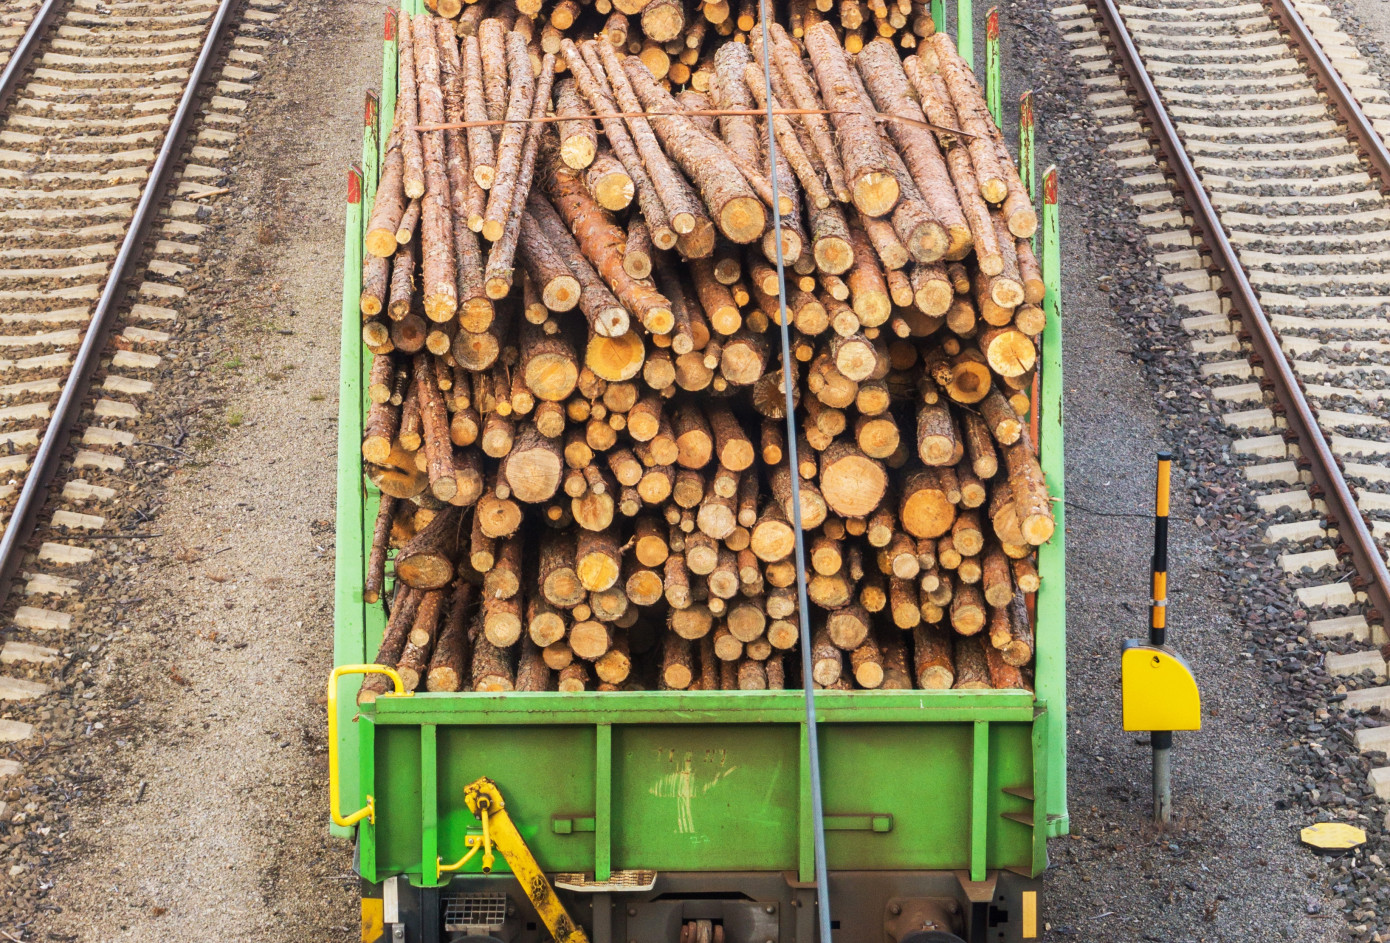 Exports of sawlog from Germany to China contract 38% in December